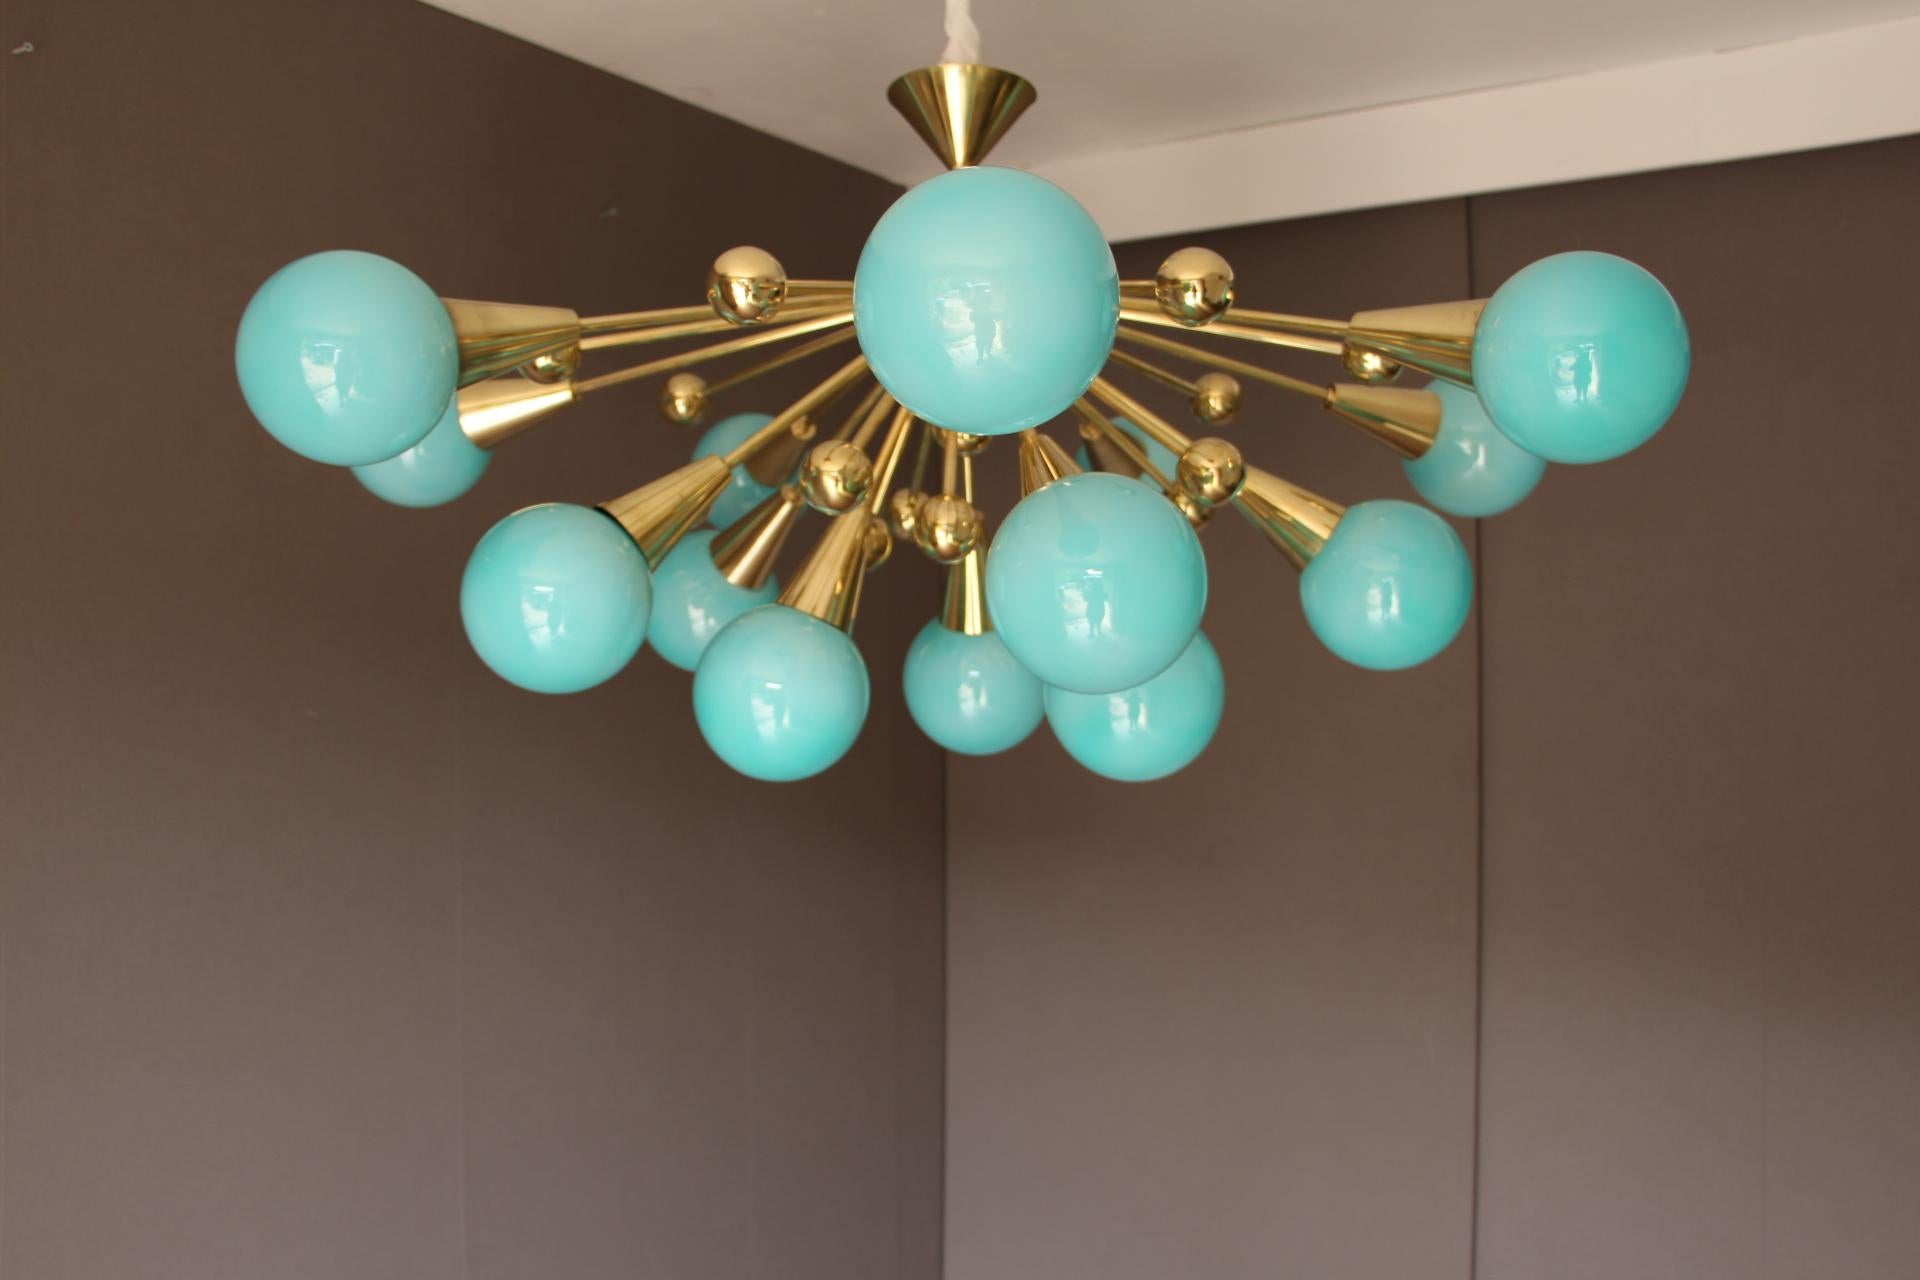 This spectacular brass chandelier features 15 turquoise blue hand made Murano glass globes and 15 brass balls extends on brass stems from its center.Color of its globes is really attractive,it is a kind of Tiffany blue.
When light is on, its